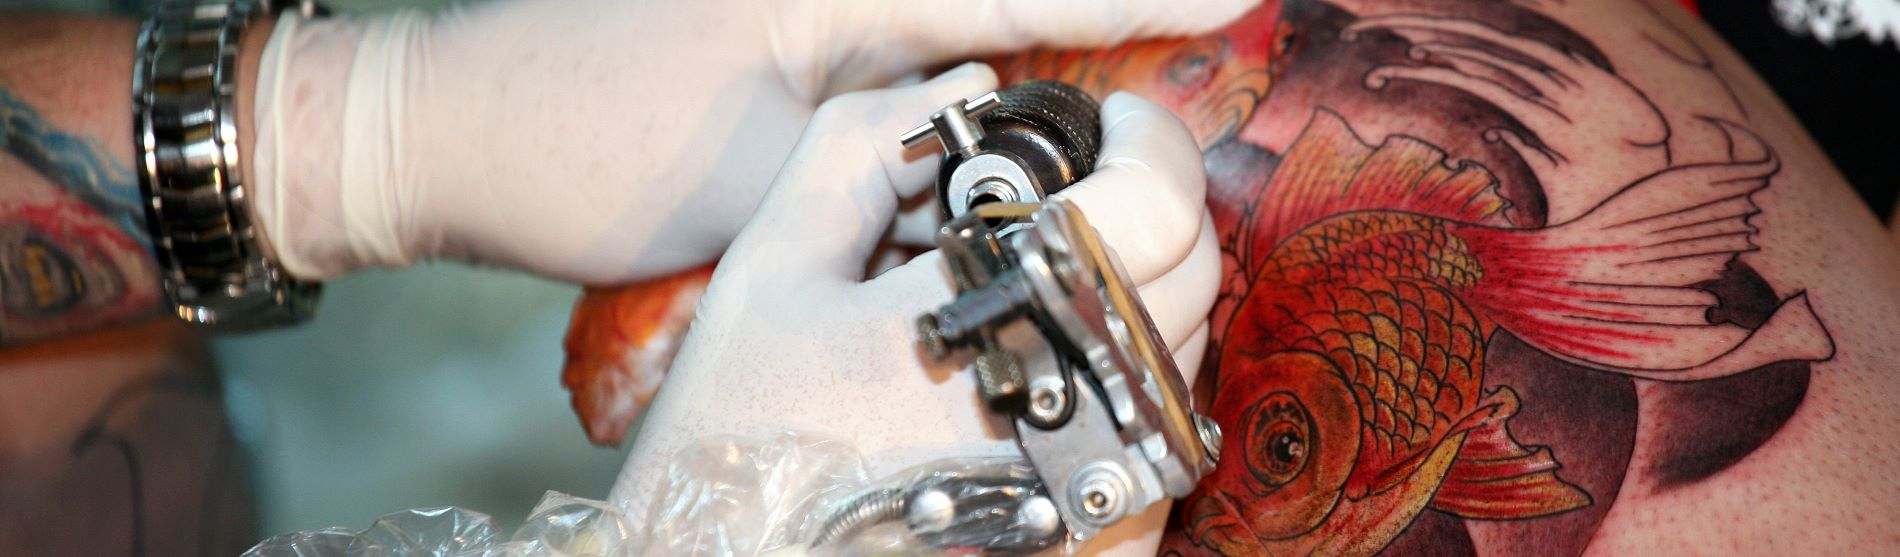 UV Ink Rubbing - BME: Tattoo, Piercing and Body Modification NewsBME: Tattoo,  Piercing and Body Modification News